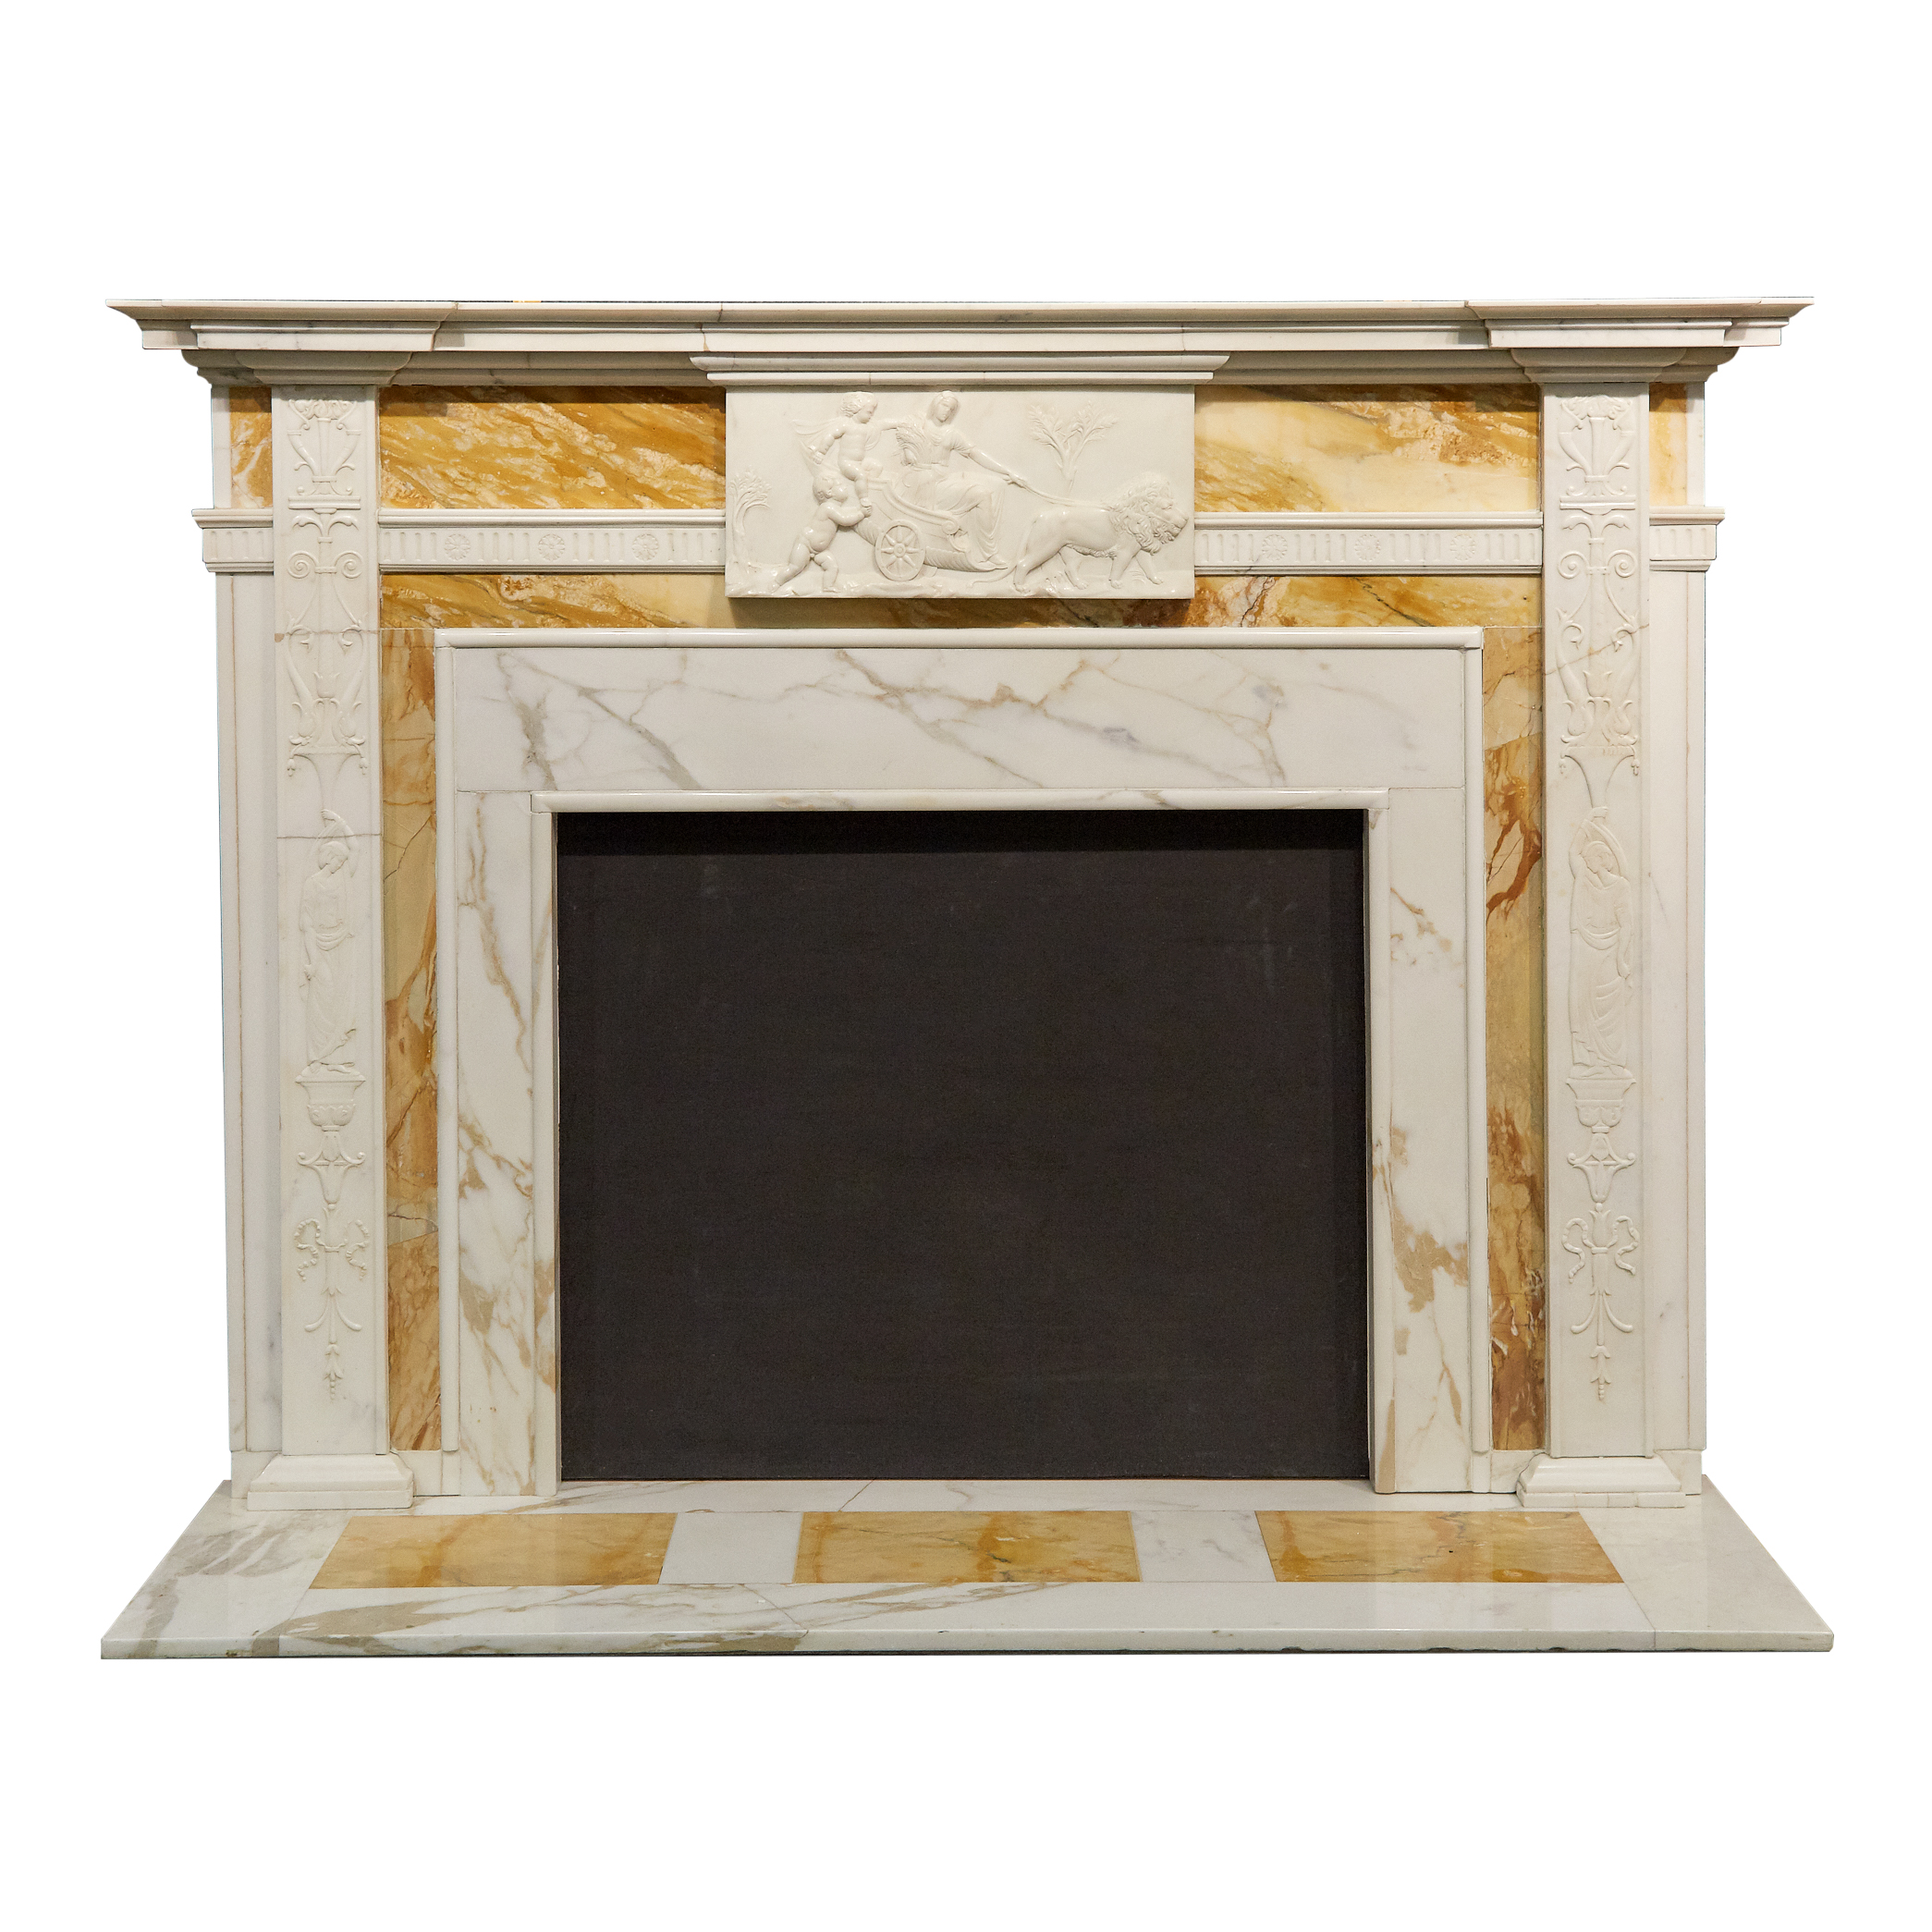 English Neo Classical White Variegated and Sienna Marble Fireplace Mantle and Surround, early 20th century